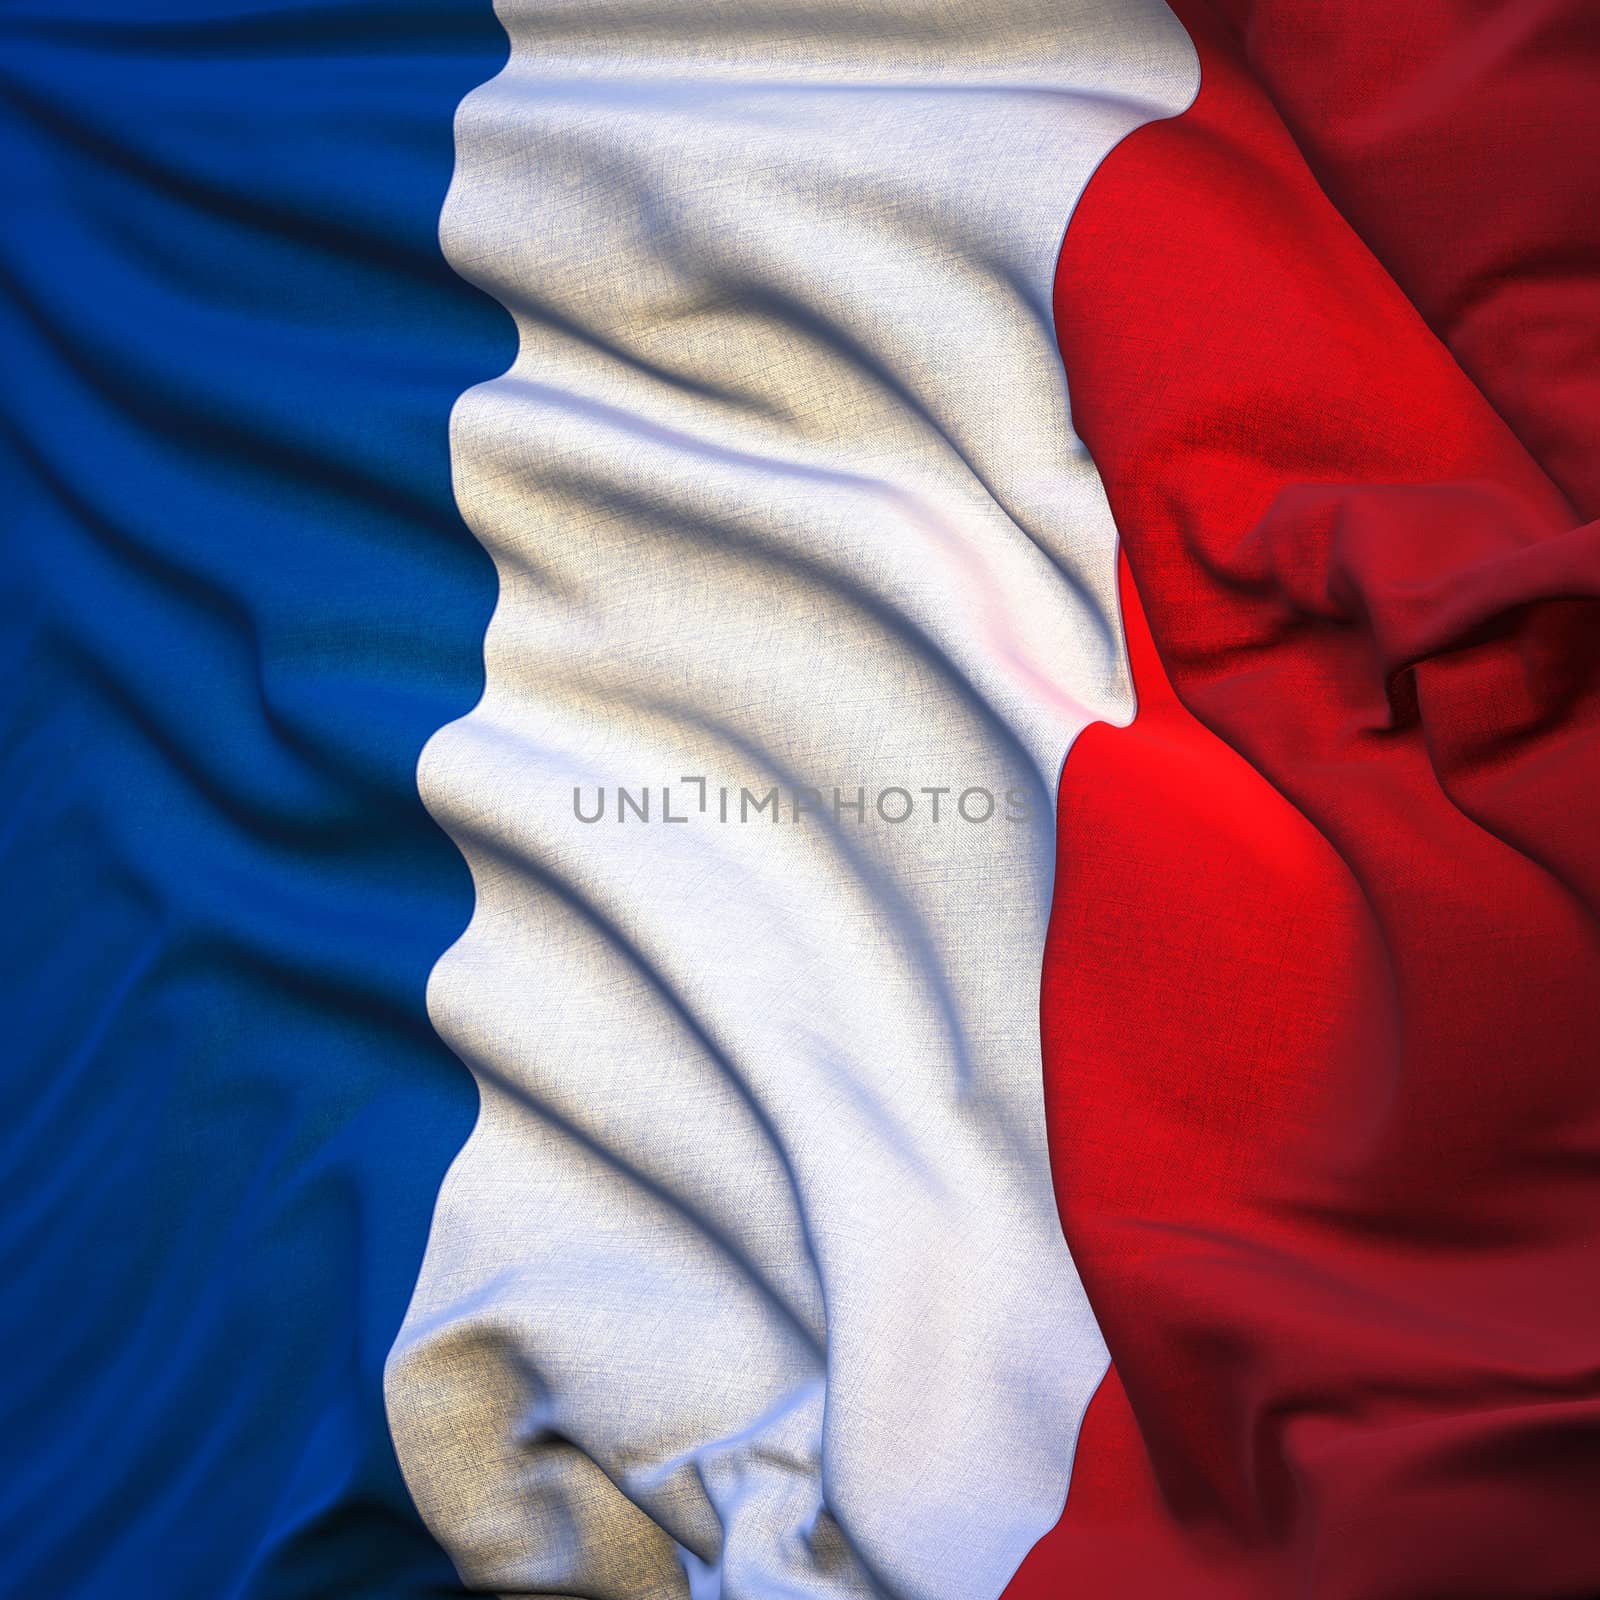 Flag of France, fluttering in the breeze, backlit rising sun. Sewn from pieces of cloth, a very realistic detailed state flag with the texture of fabric fluttering in the breeze, backlit by the rising sun light